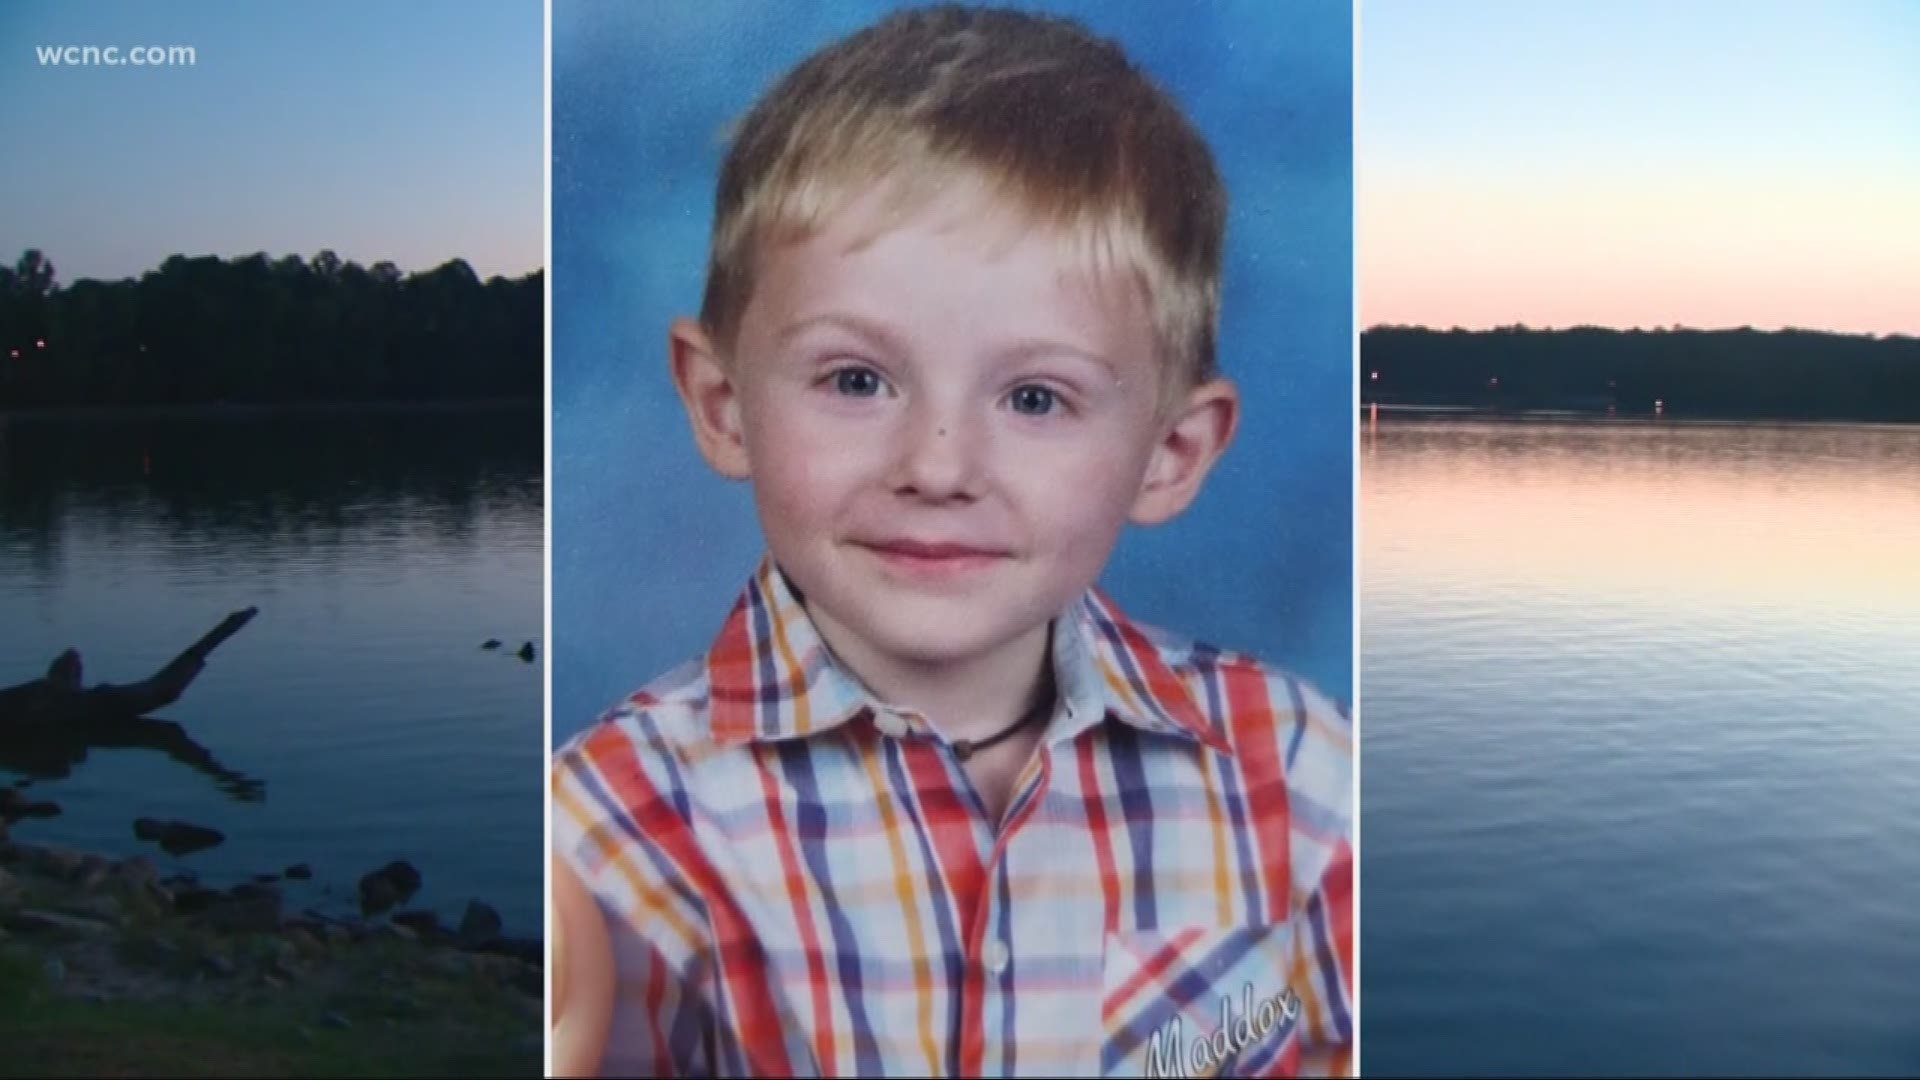 The weather was an issue Wednesday night, but investigators said they would only call off the search for the six-year-old with special needs if they were in immediate danger.